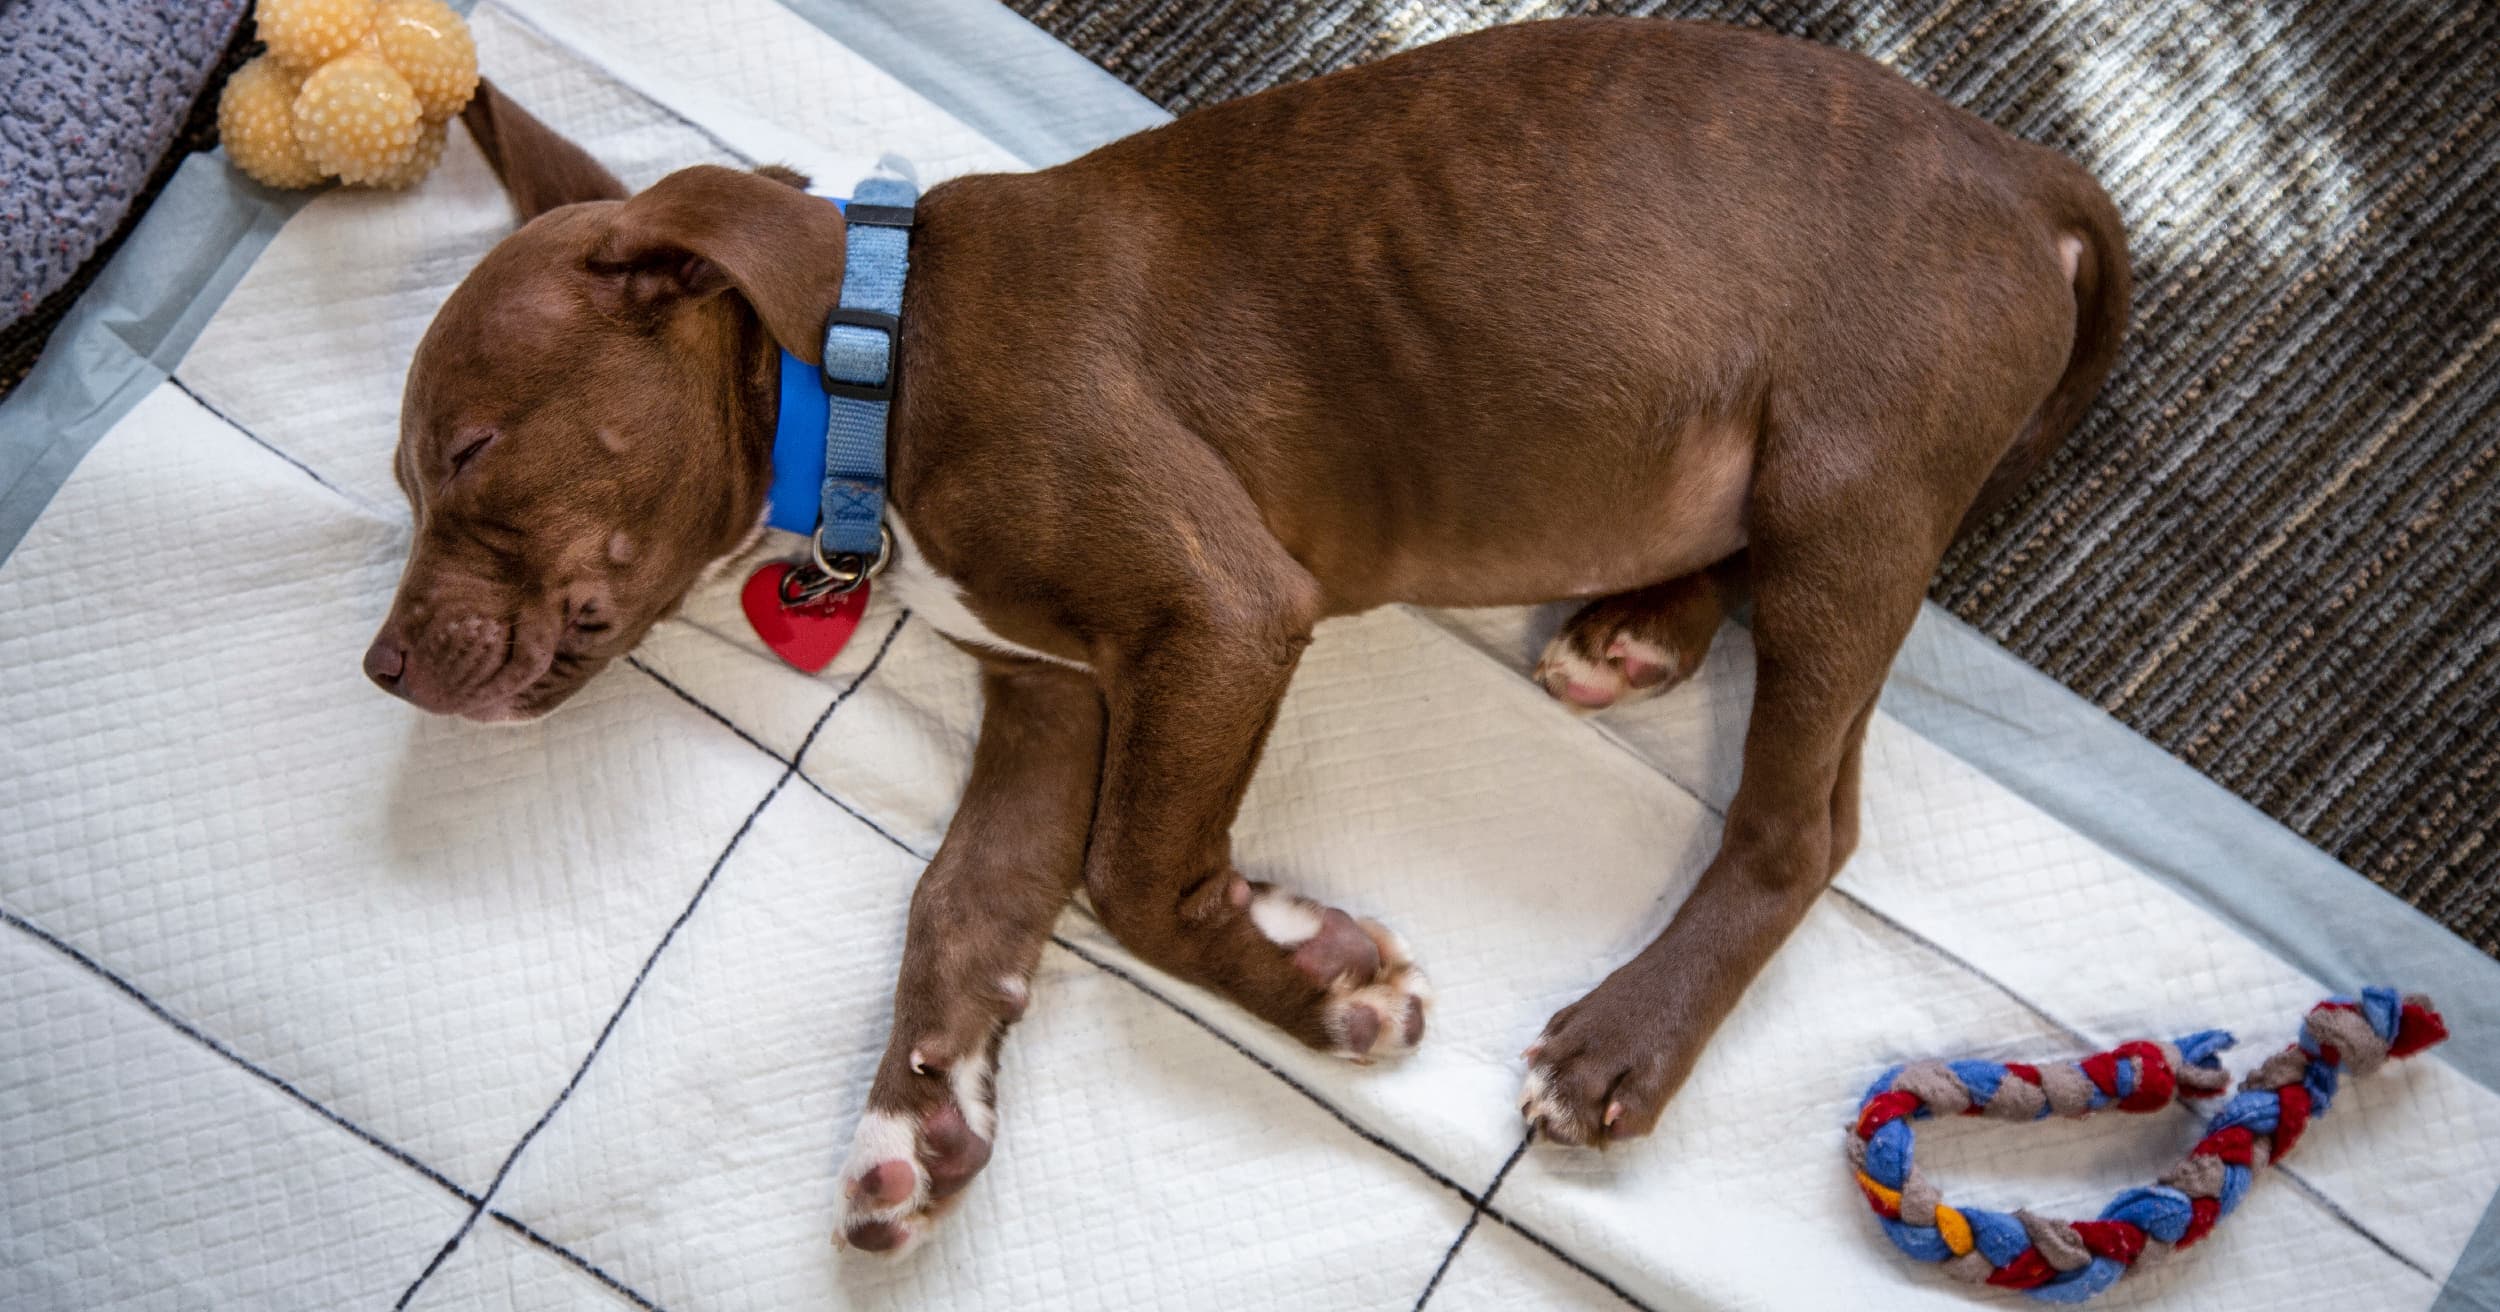 A brown puppy lying on a pee pad on the floor.